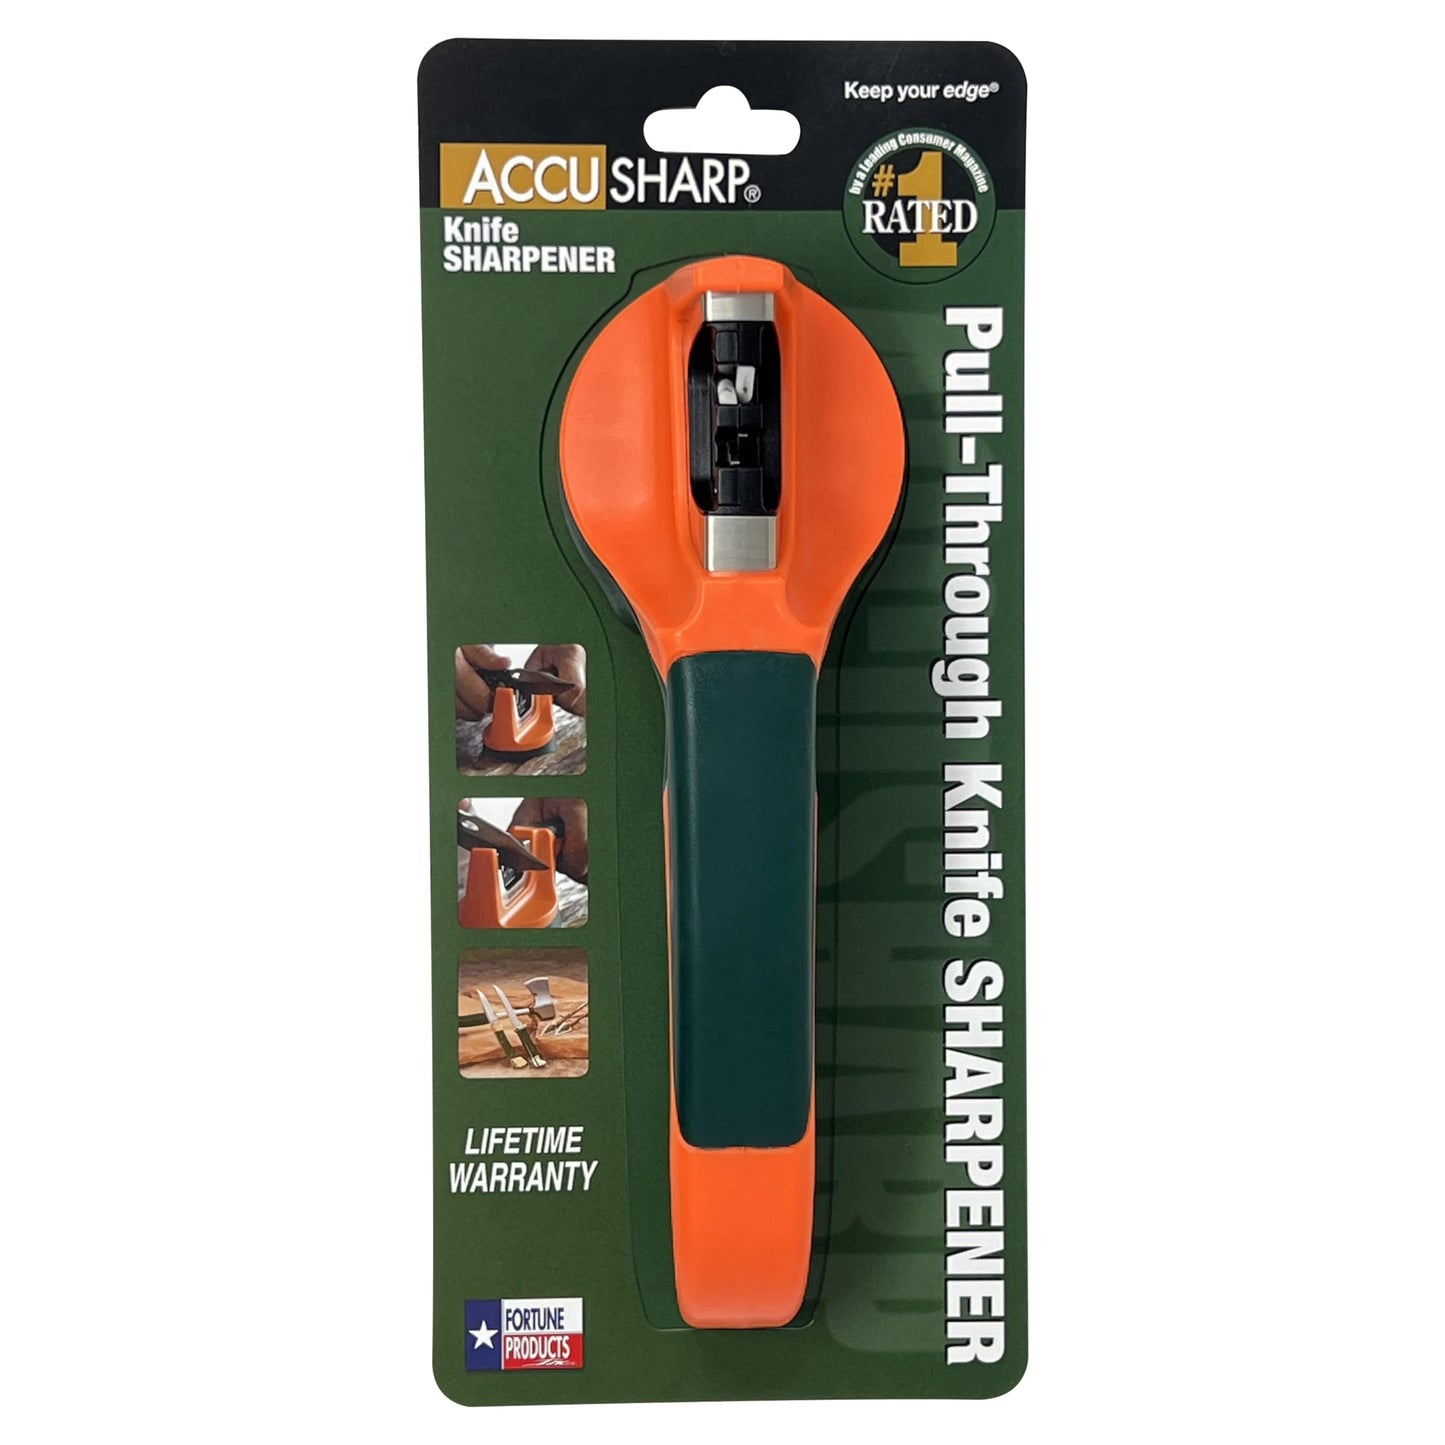 AccuSharp Pull-Through Knife Sharpener for Cooking, Camping, Fishing, Outdoor, and More (Orange/Green)